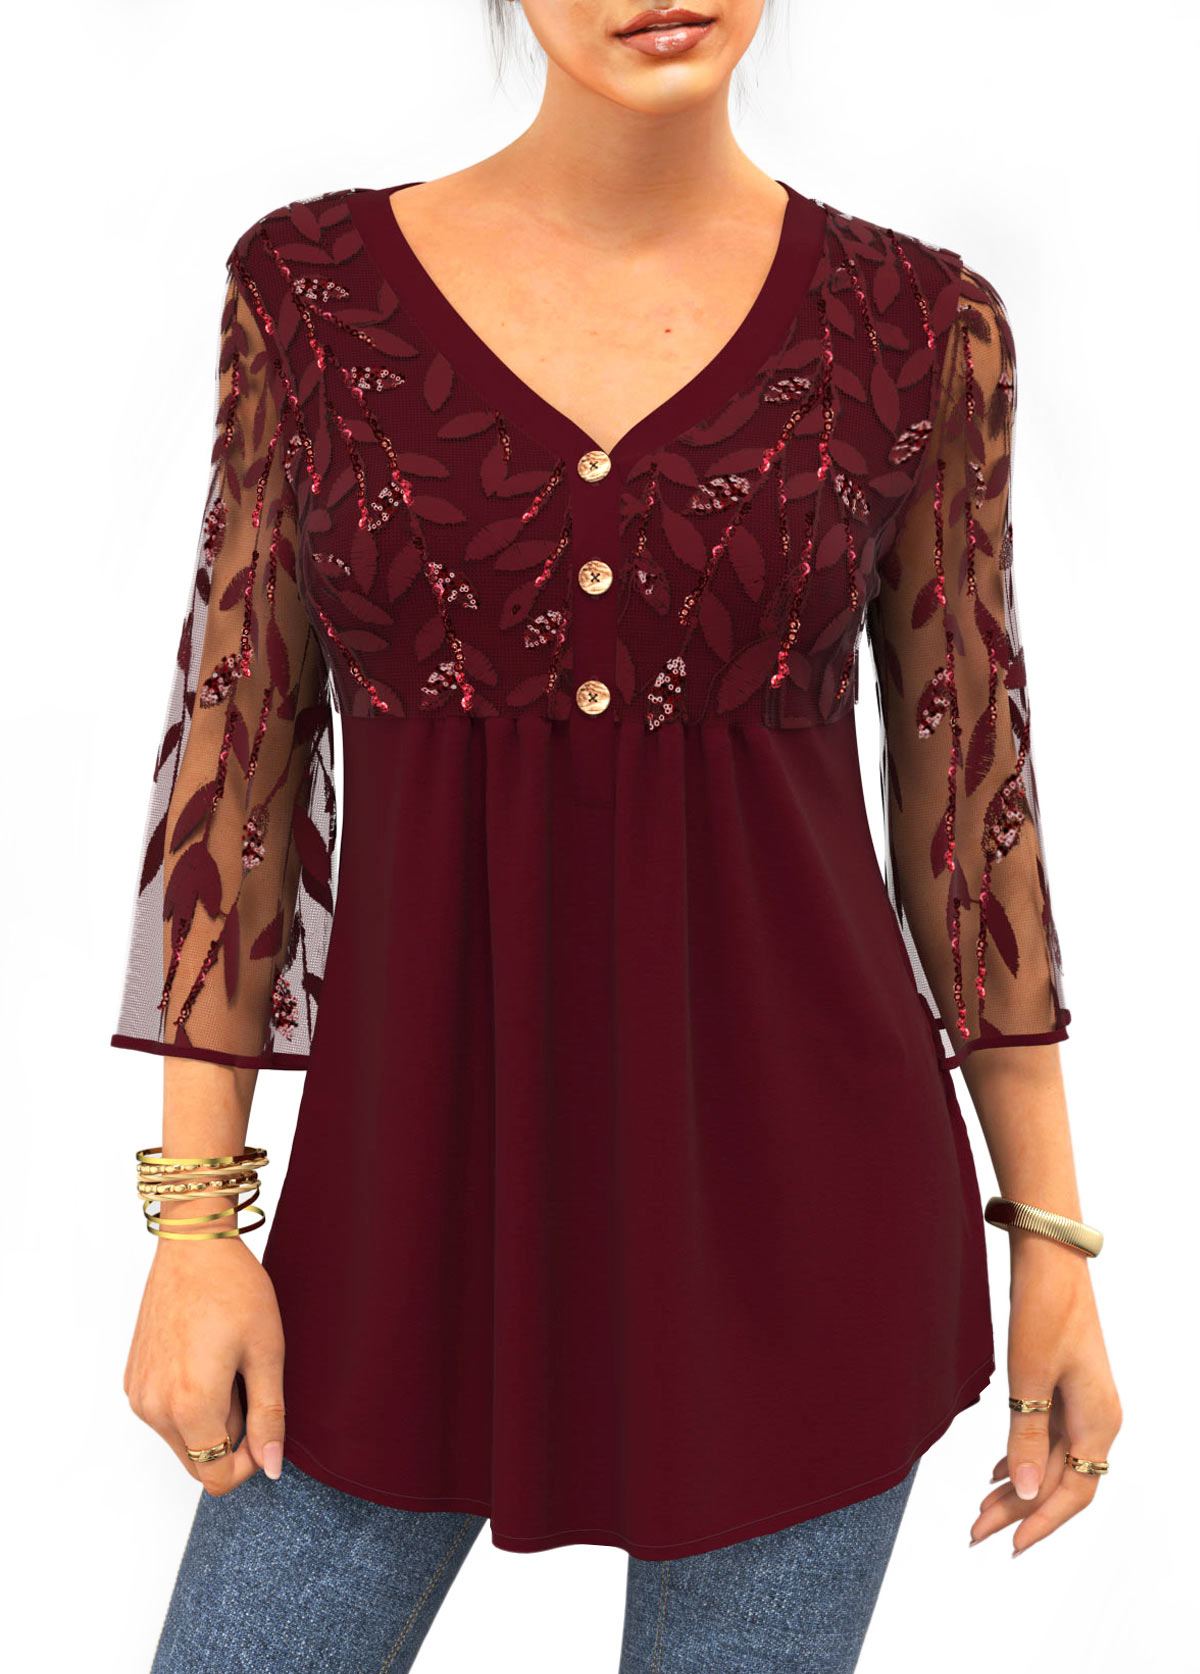 Lace Stitching Sequin Solid 3/4 Sleeve T Shirt